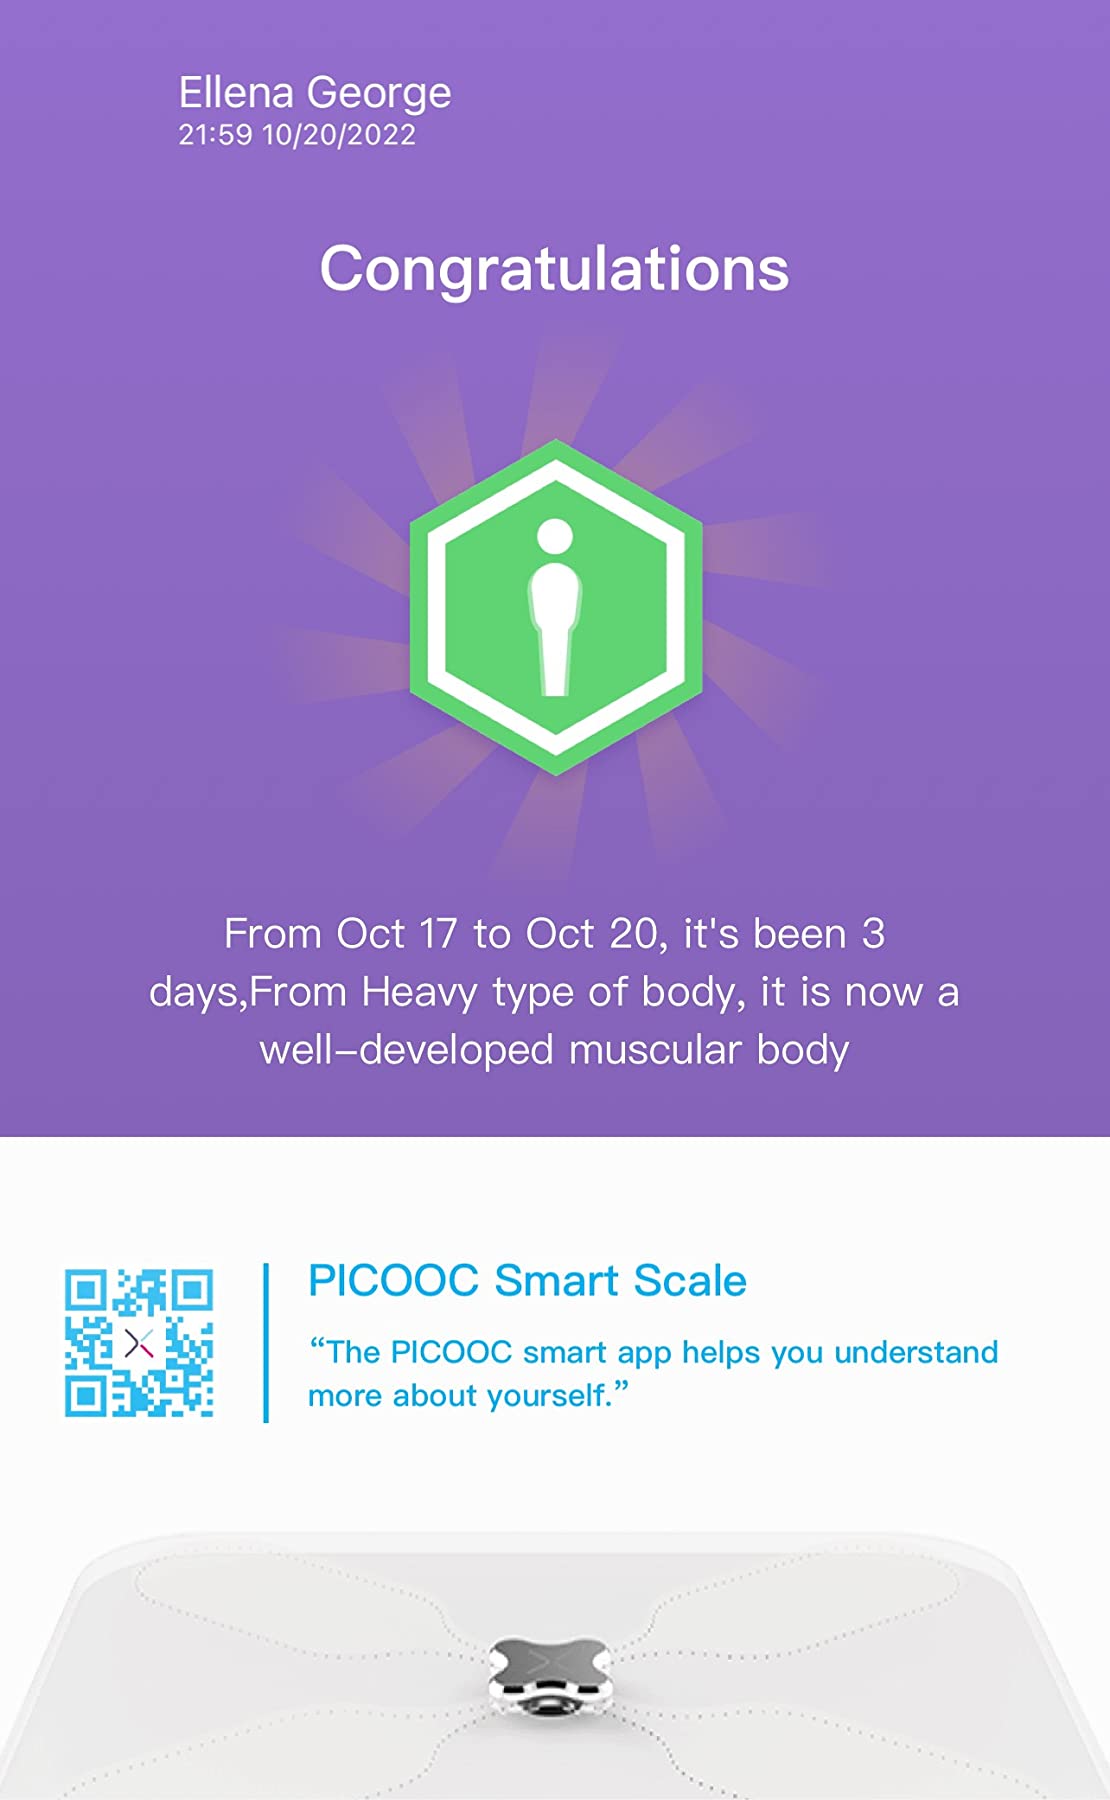 PICOOC Smart Scale for Body Weight and Fat Georgia